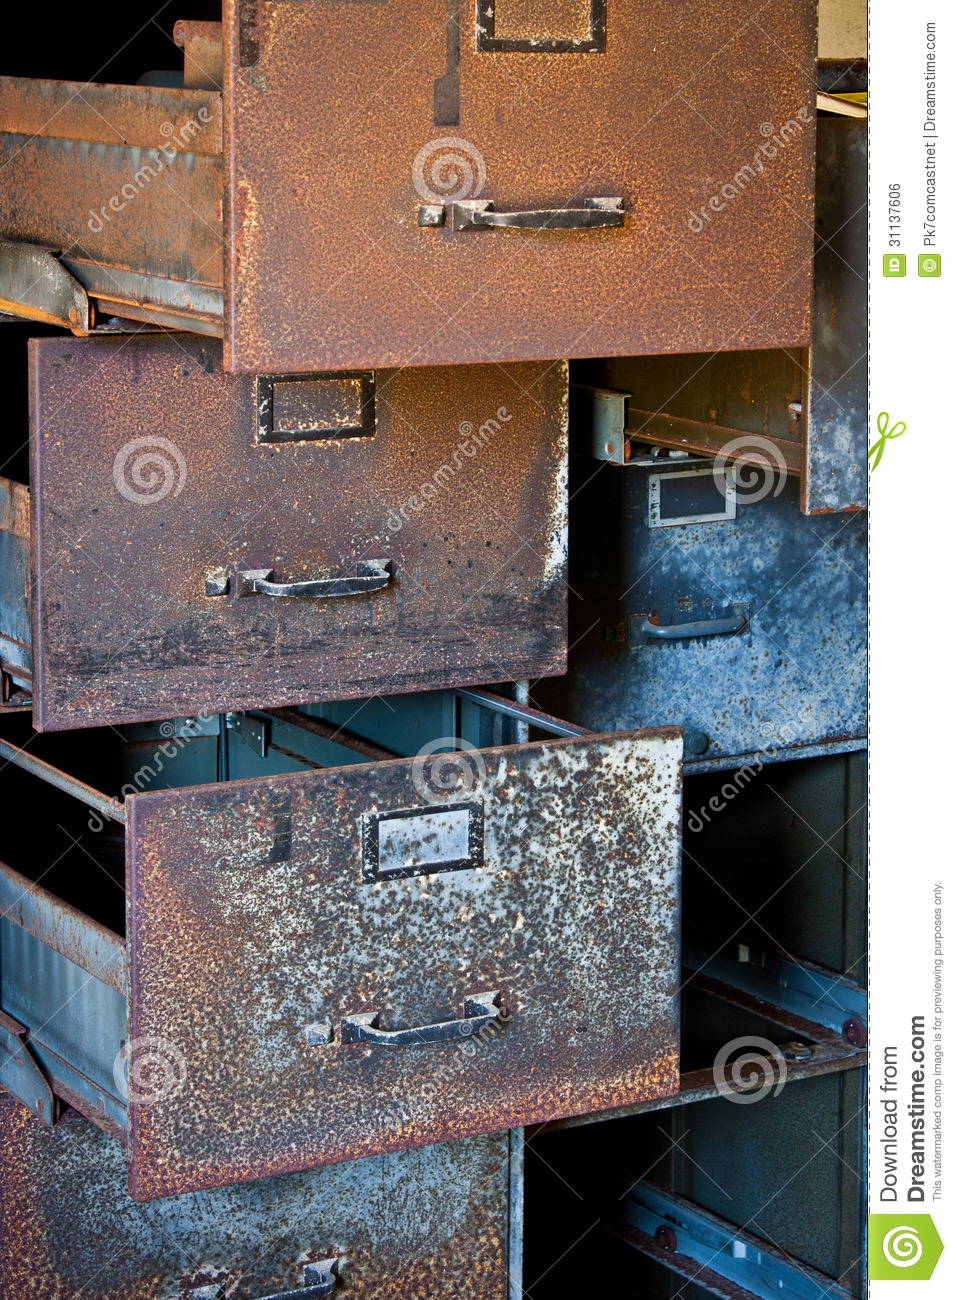 Rusty Filing Cabinets Stock Photo Image Of Corrosion 31137606 in dimensions 957 X 1300